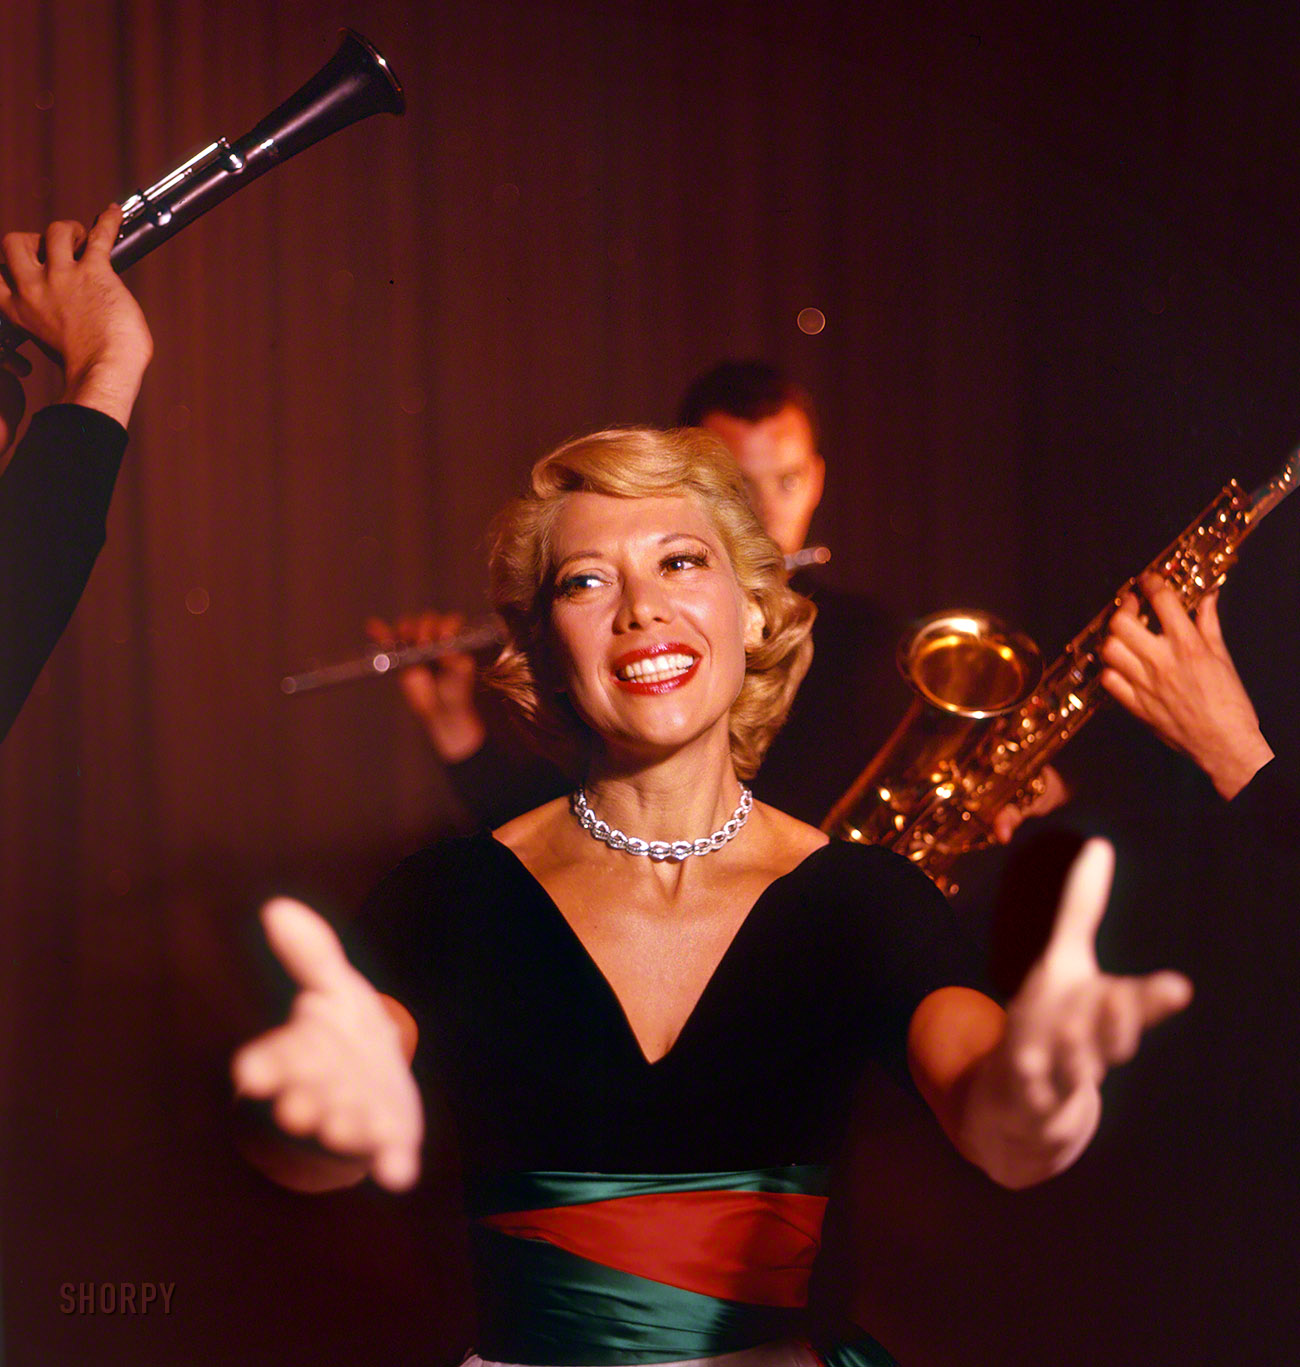 October 1955. "Singer Dinah Shore on the set of her television show." Color transparency from photos by Earl Theisen and Robert Vose for the Look magazine assignment "Dinah Goes Glamorous." View full size.